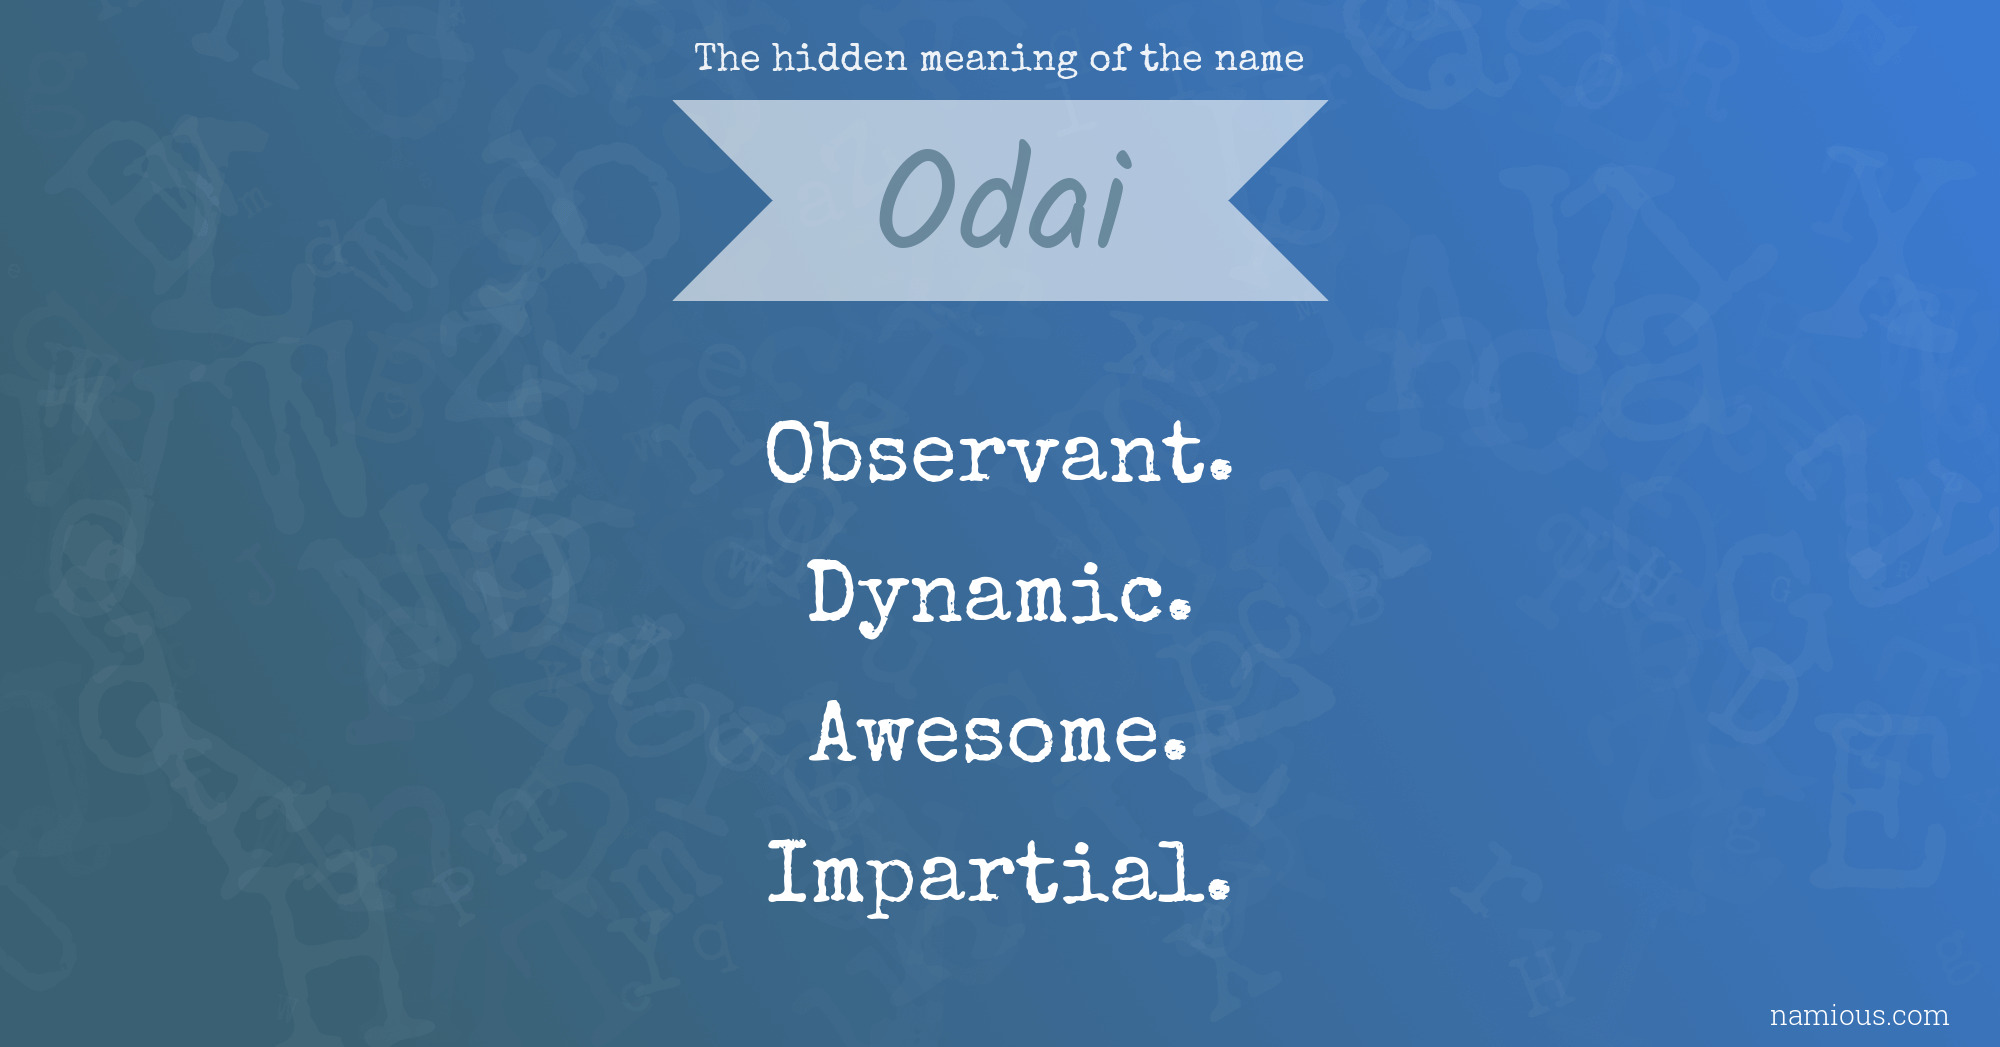 The hidden meaning of the name Odai